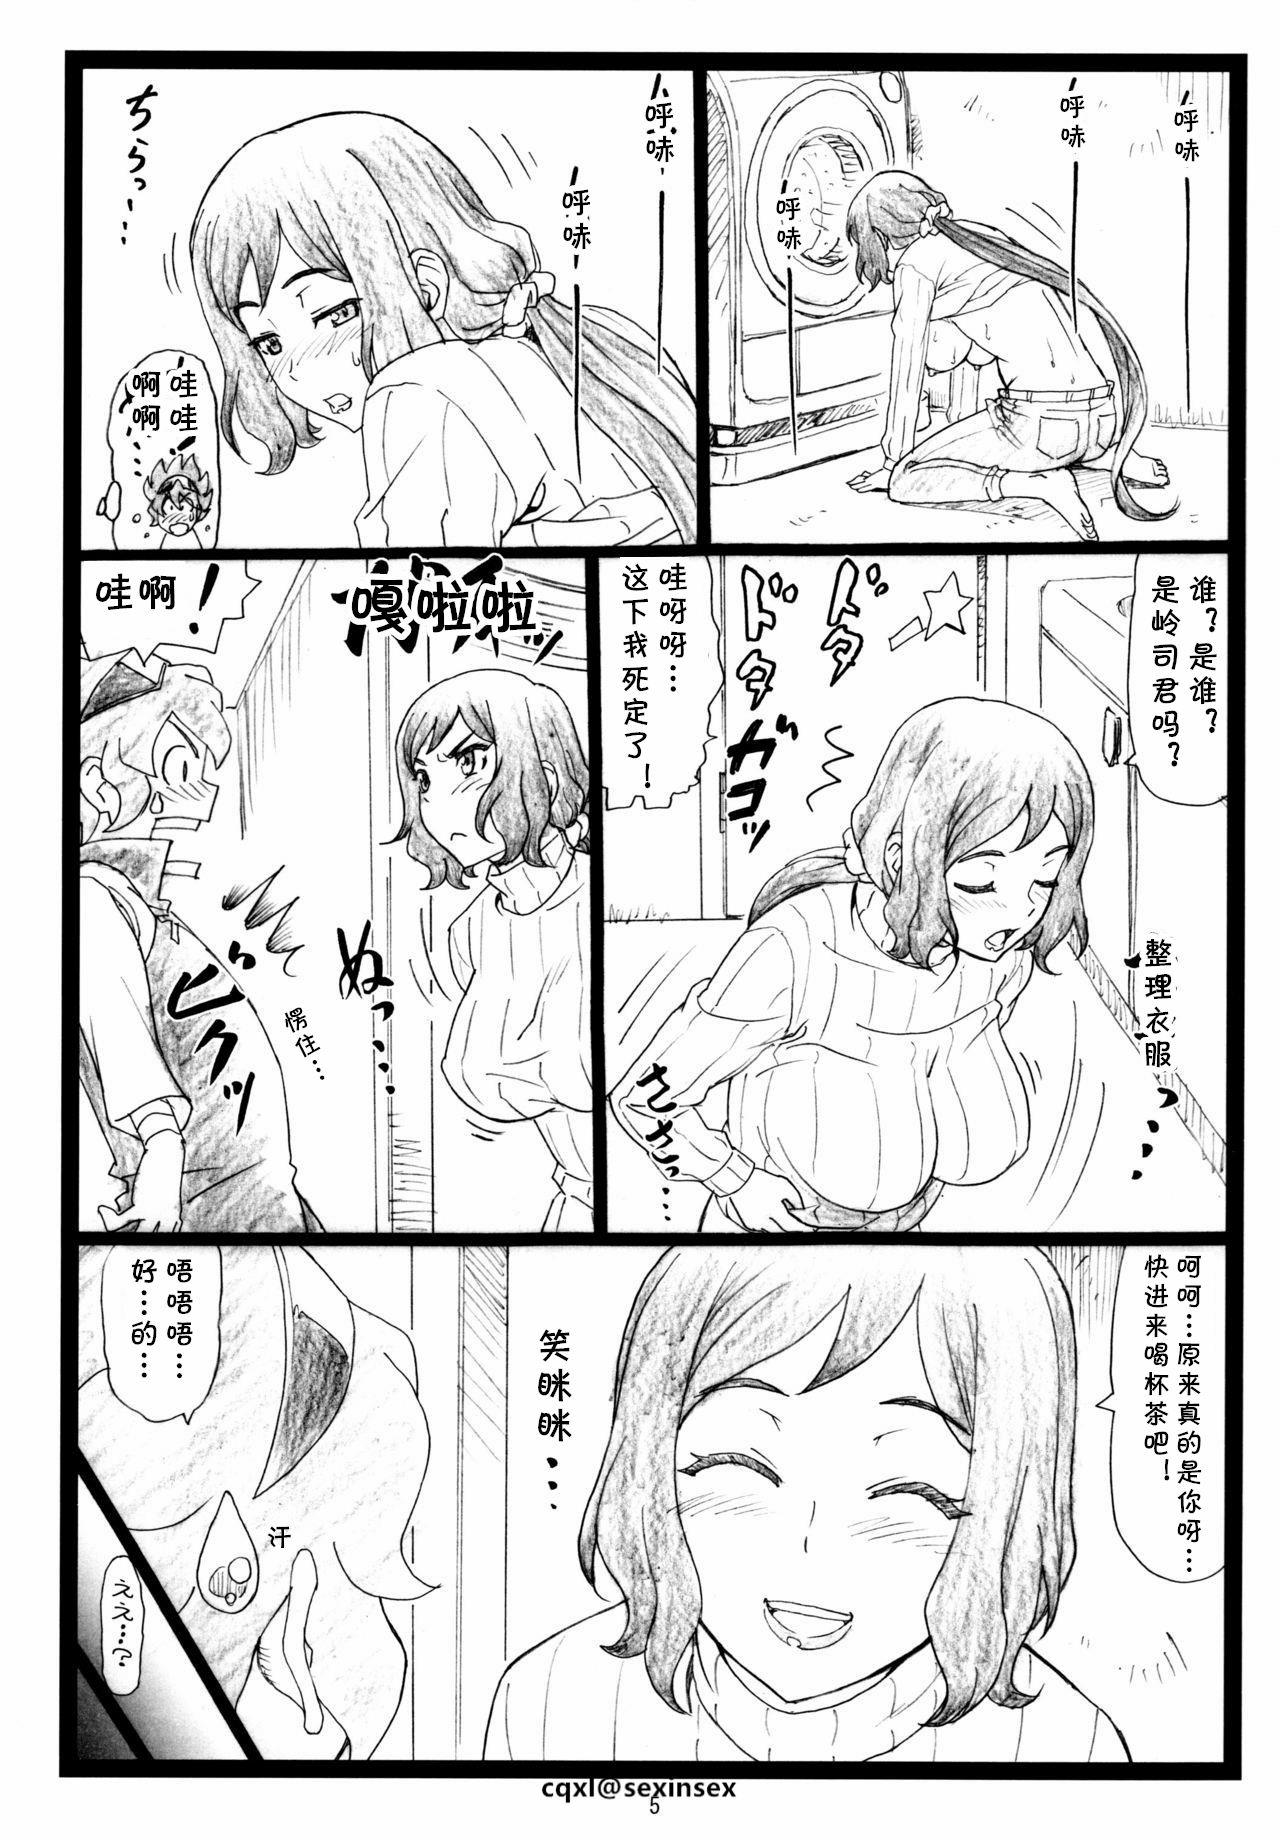 Topless G...M - Gundam build fighters Gay Boys - Page 4